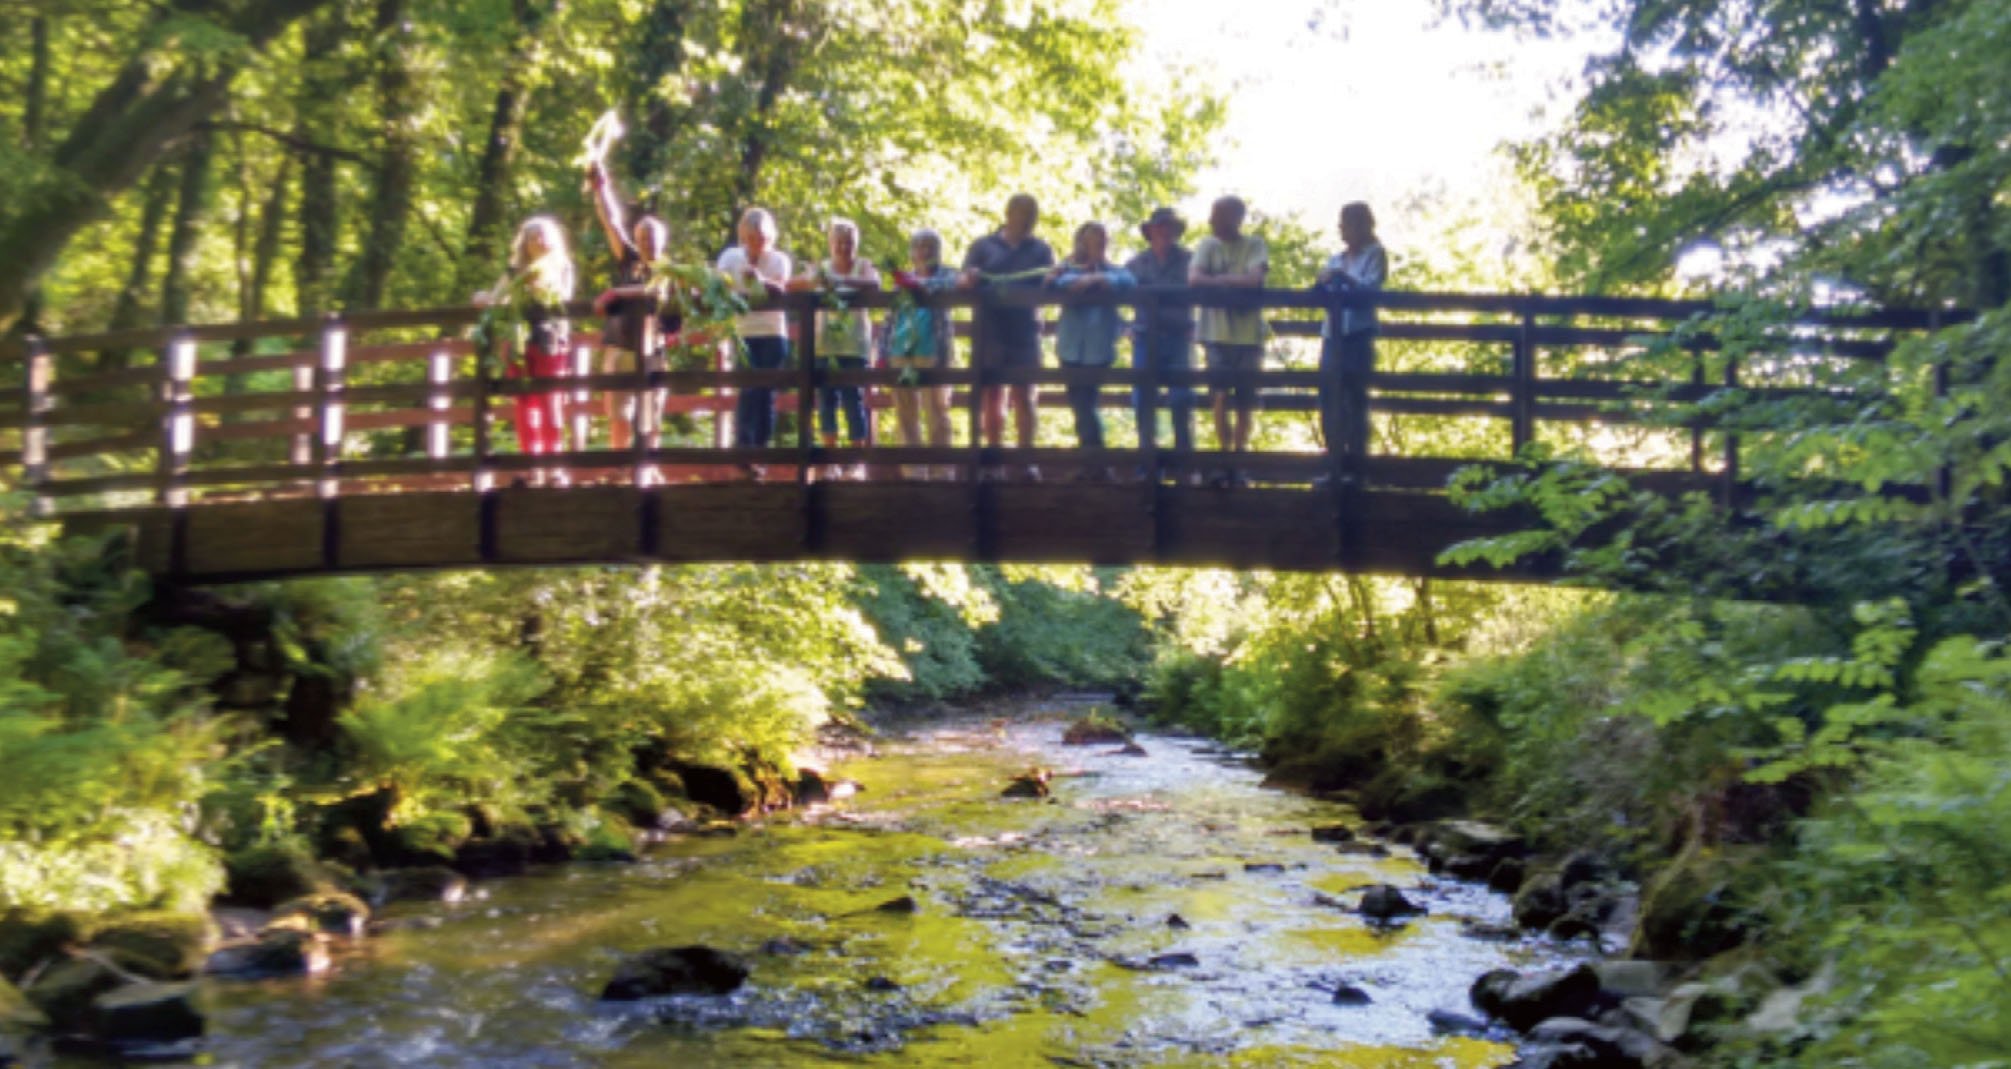 10 people standing on a wooden footbridge over a river. People pictured are volunteers who have been removing Himalayan Balsam from the Gwaun Valley, Pembrokeshire, Wales, UK